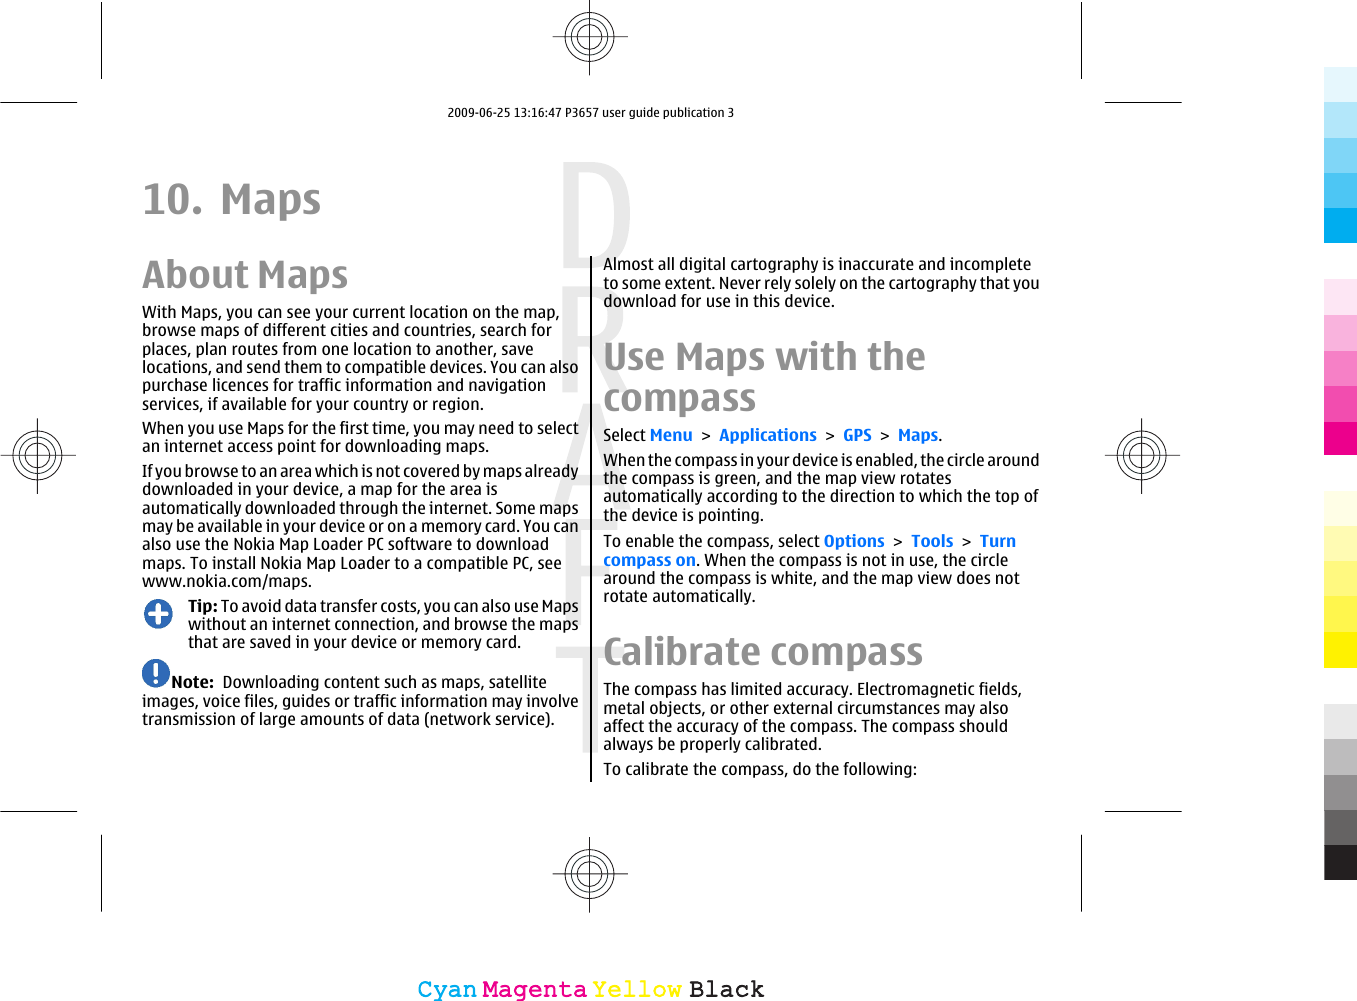 10. MapsAbout MapsWith Maps, you can see your current location on the map,browse maps of different cities and countries, search forplaces, plan routes from one location to another, savelocations, and send them to compatible devices. You can alsopurchase licences for traffic information and navigationservices, if available for your country or region.When you use Maps for the first time, you may need to selectan internet access point for downloading maps.If you browse to an area which is not covered by maps alreadydownloaded in your device, a map for the area isautomatically downloaded through the internet. Some mapsmay be available in your device or on a memory card. You canalso use the Nokia Map Loader PC software to downloadmaps. To install Nokia Map Loader to a compatible PC, seewww.nokia.com/maps.Tip: To avoid data transfer costs, you can also use Mapswithout an internet connection, and browse the mapsthat are saved in your device or memory card.Note:  Downloading content such as maps, satelliteimages, voice files, guides or traffic information may involvetransmission of large amounts of data (network service).Almost all digital cartography is inaccurate and incompleteto some extent. Never rely solely on the cartography that youdownload for use in this device.Use Maps with thecompassSelect Menu &gt; Applications &gt; GPS &gt; Maps.When the compass in your device is enabled, the circle aroundthe compass is green, and the map view rotatesautomatically according to the direction to which the top ofthe device is pointing.To enable the compass, select Options &gt; Tools &gt; Turncompass on. When the compass is not in use, the circlearound the compass is white, and the map view does notrotate automatically.Calibrate compassThe compass has limited accuracy. Electromagnetic fields,metal objects, or other external circumstances may alsoaffect the accuracy of the compass. The compass shouldalways be properly calibrated.To calibrate the compass, do the following:CyanCyanMagentaMagentaYellowYellowBlackBlack2009-06-25 13:16:47 P3657 user guide publication 3